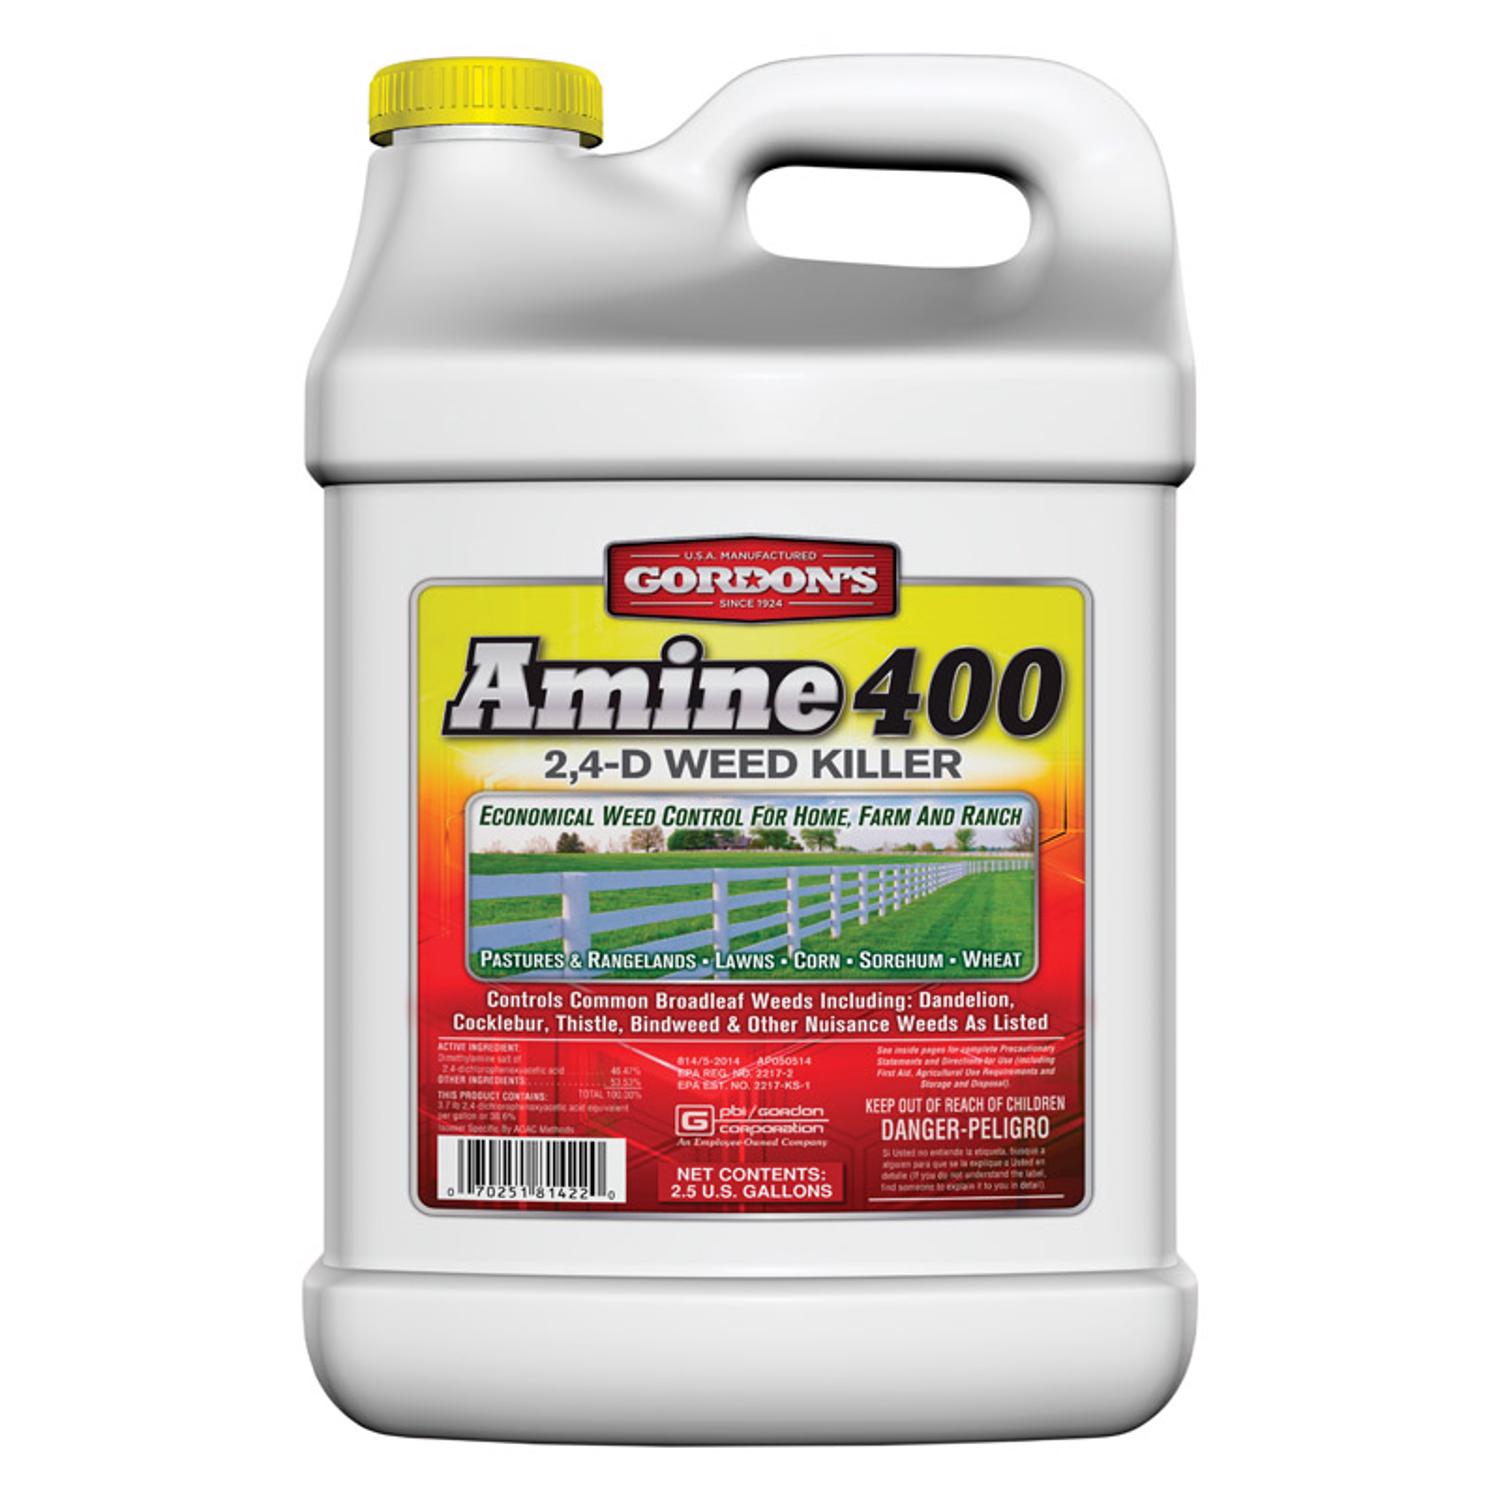 Image of Amine 400 weed killer being transported in a truck